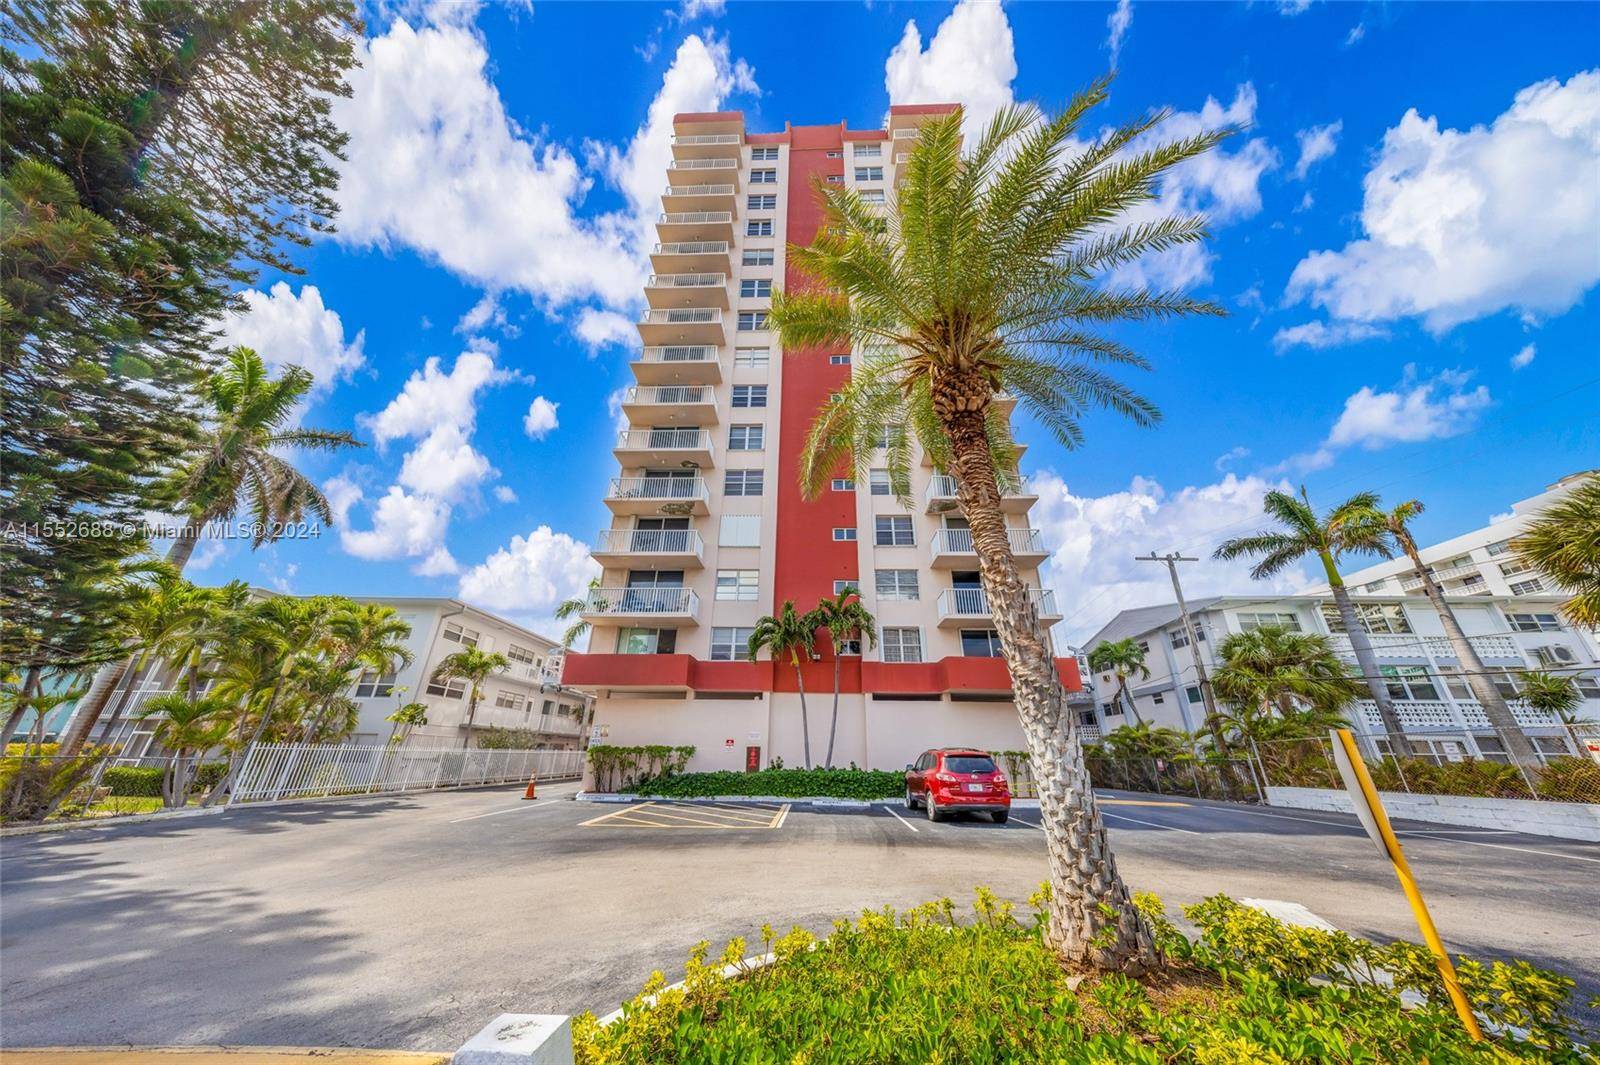 Great opportunity to live or invest in the beautiful condo ; high floor 2 Bedroom and 2 Bathroom with a nice view from the balcony.